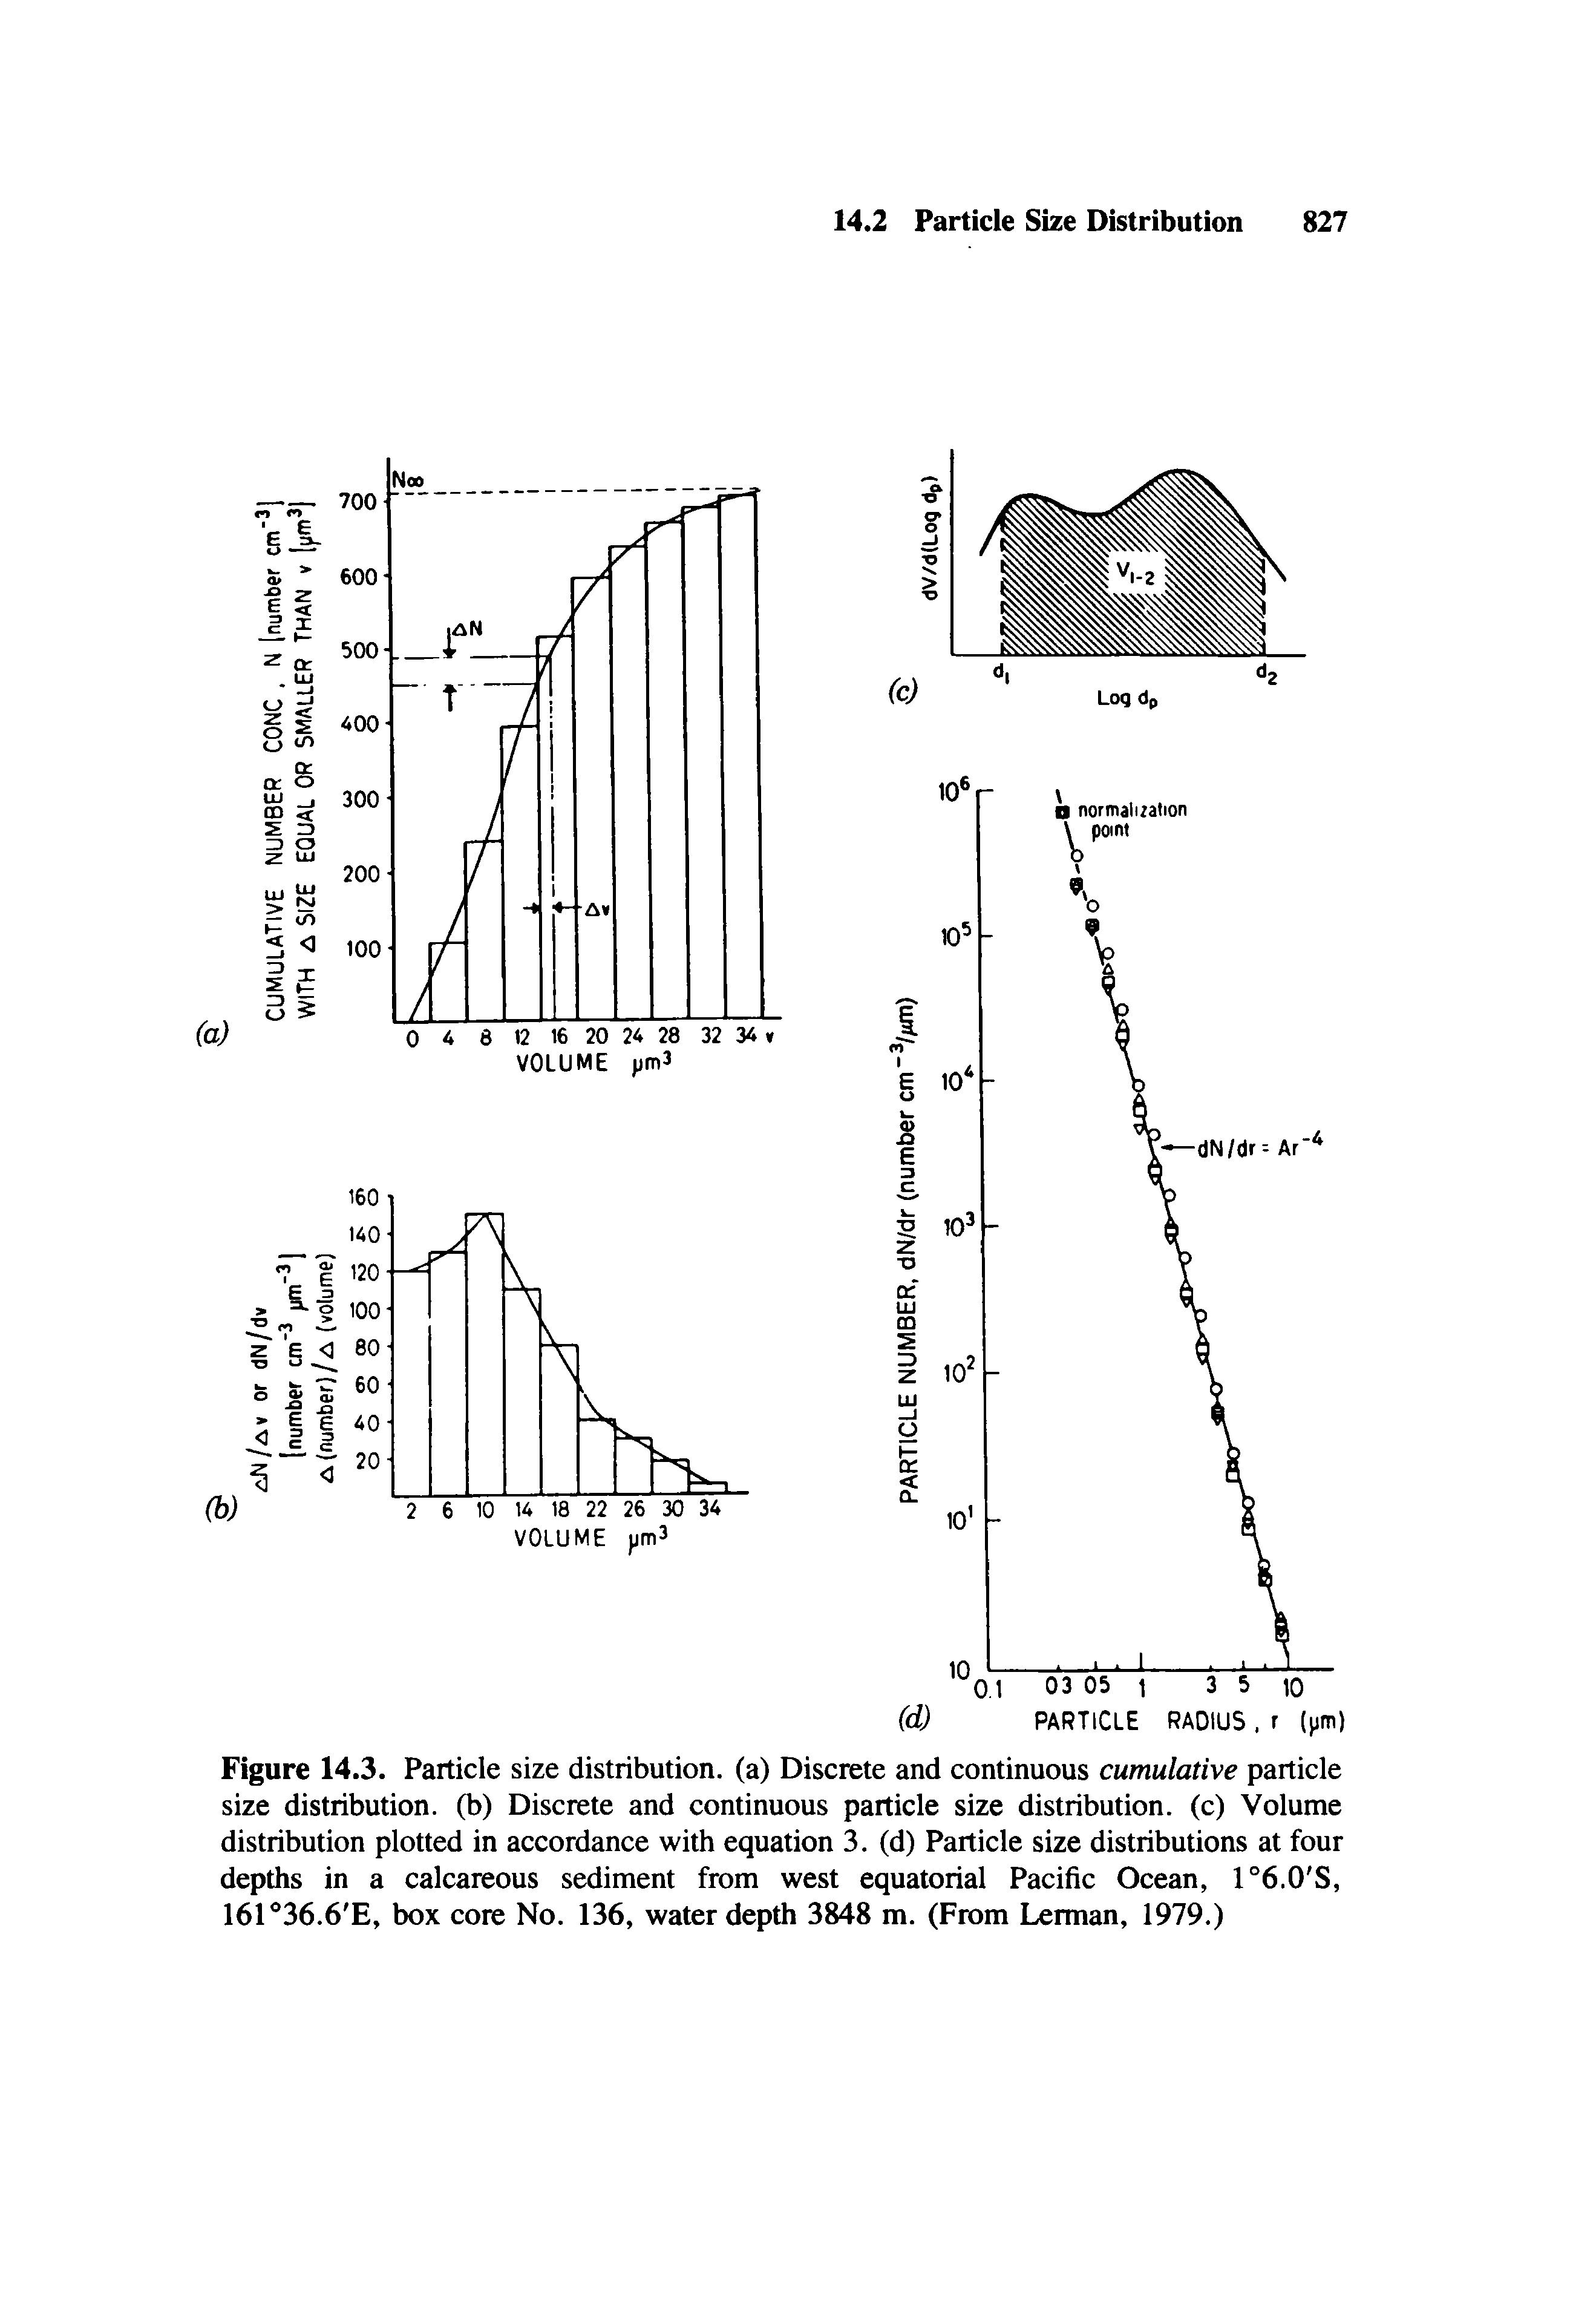 Figure 14.3. Particle size distribution, (a) Discrete and continuous cumulative particle size distribution, (b) Discrete and continuous particle size distribution, (c) Volume distribution plotted in accordance with equation 3. (d) Particle size distributions at four depths in a calcareous sediment from west equatorial Pacific Ocean, 1°6.0 S, 161 36.6 E, box core No. 136, water depth 3848 m. (From Lerman, 1979.)...